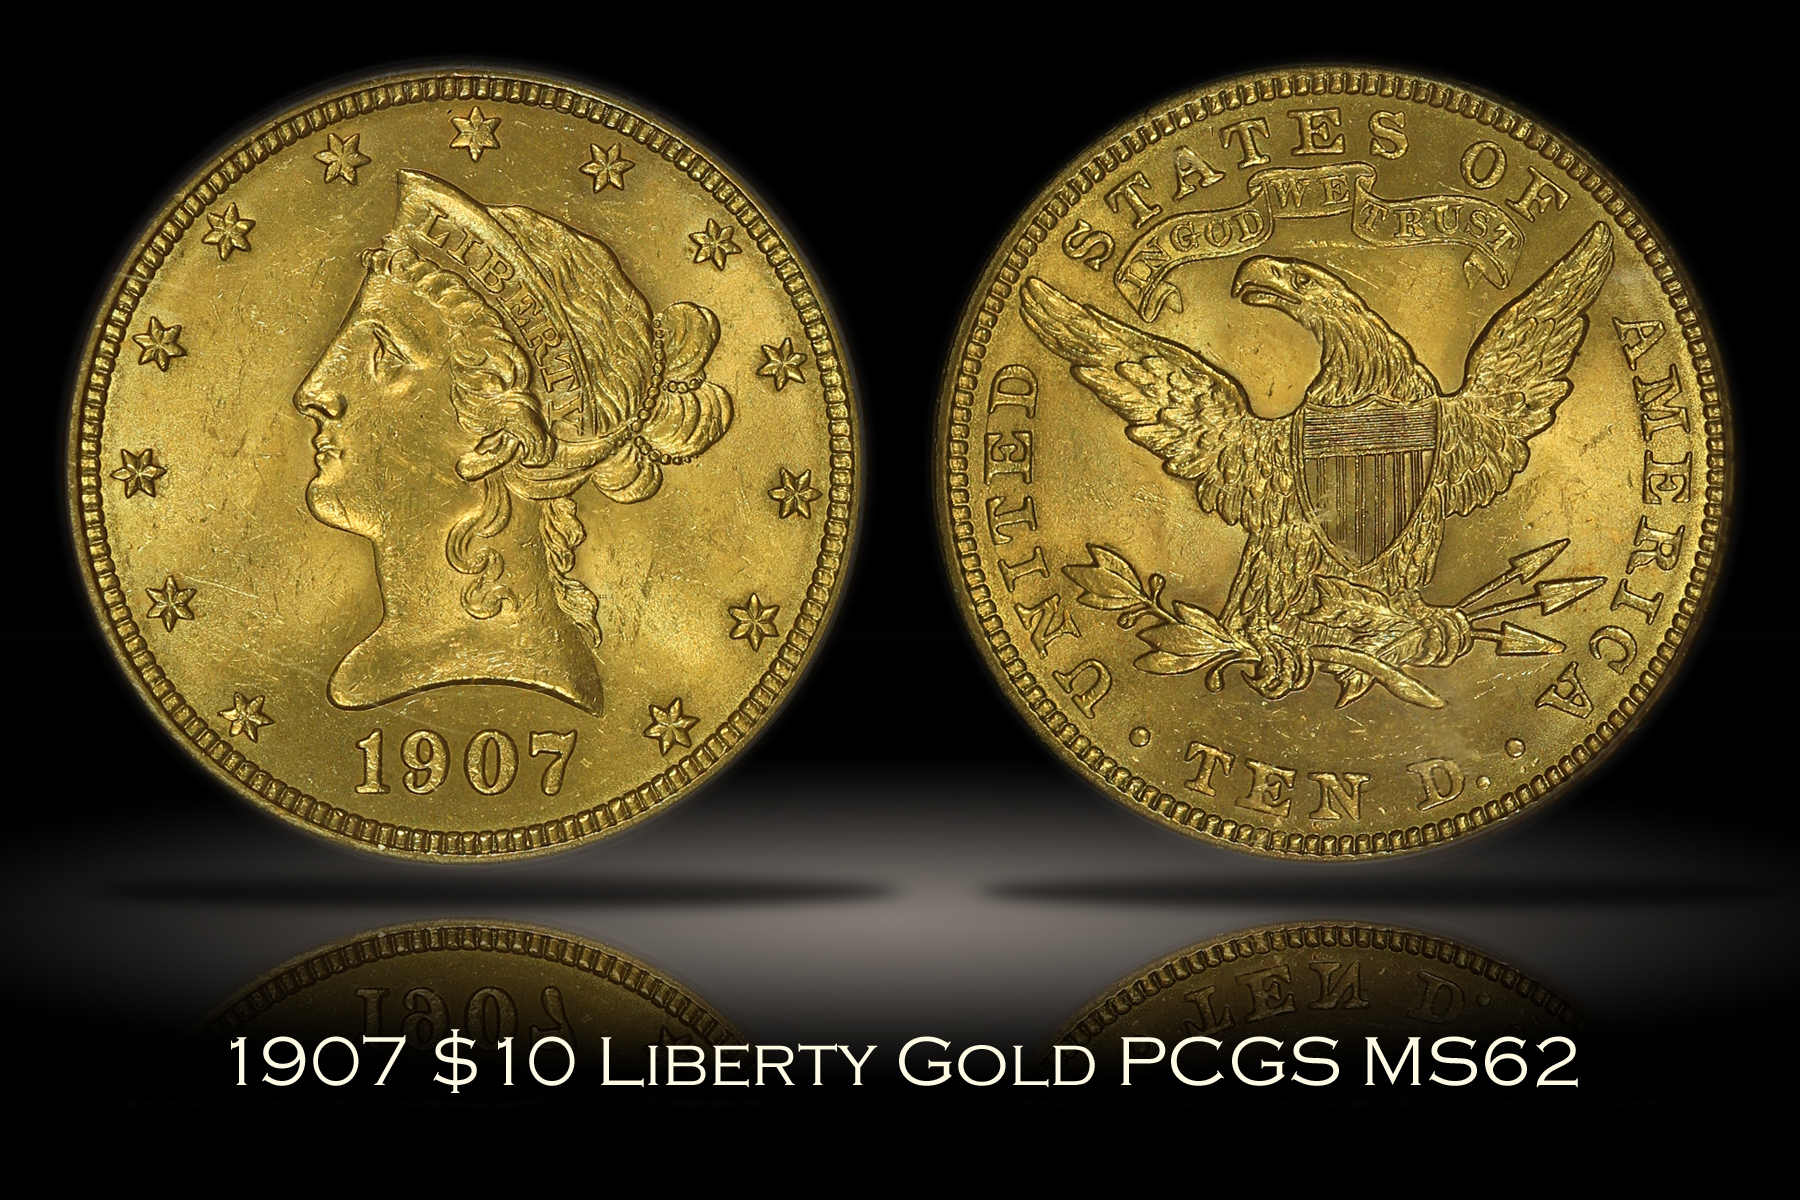 Michael Kittle Rare Coins - 1907 $10 Liberty Gold PCGS MS62